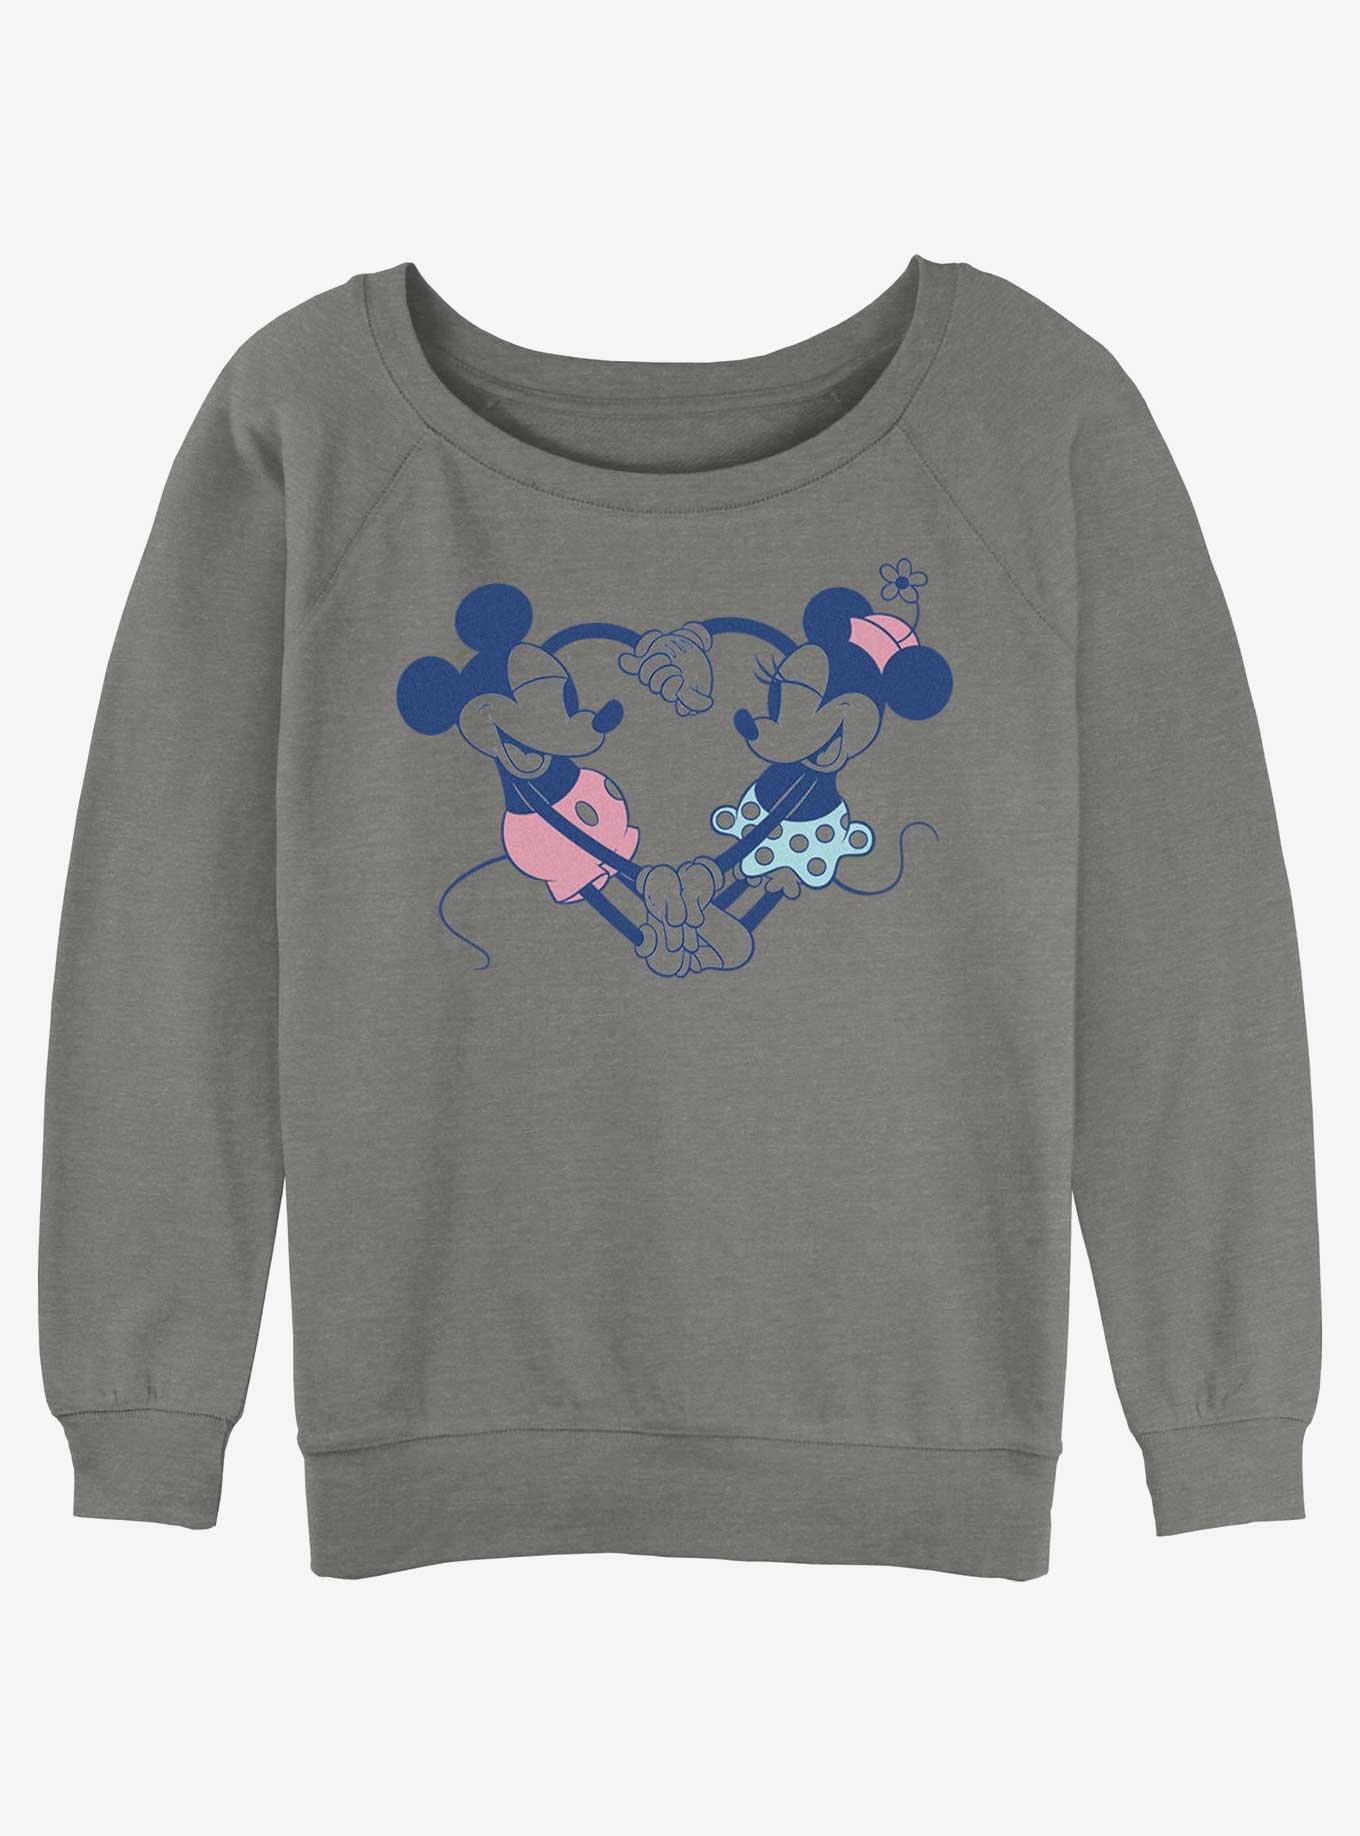 Disney Mickey Mouse & Minnie Mouse Heart Pair Girls Slouchy Sweatshirt, GRAY HTR, hi-res